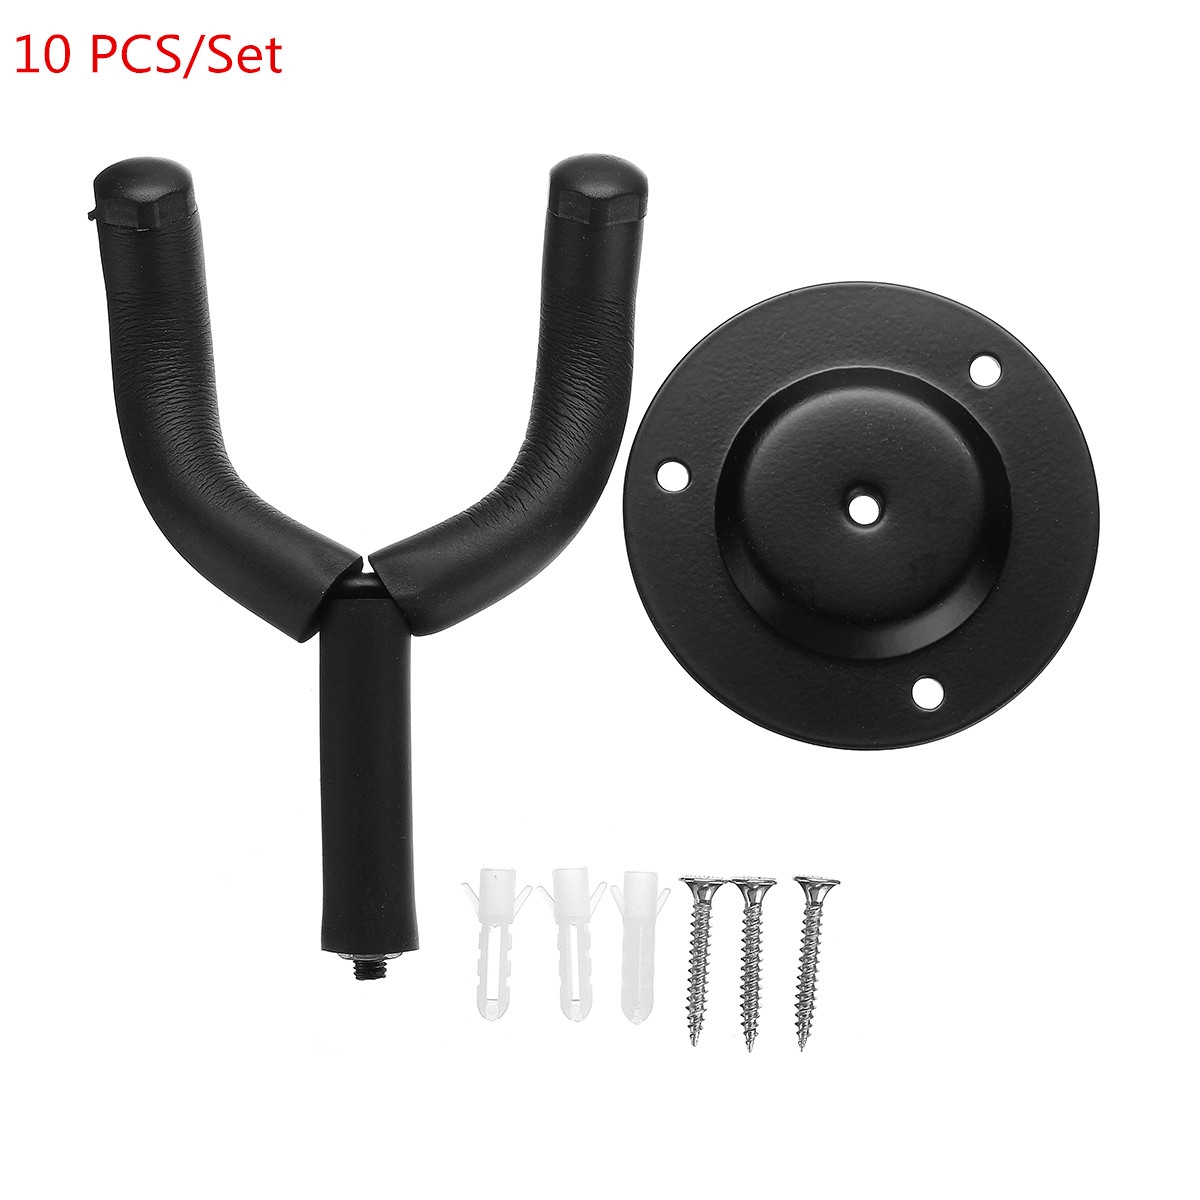 10 PCS Guitar Stand Hook Adjustable Wall Mounted for Electric Acoustic Guitar Bass Holder Padded